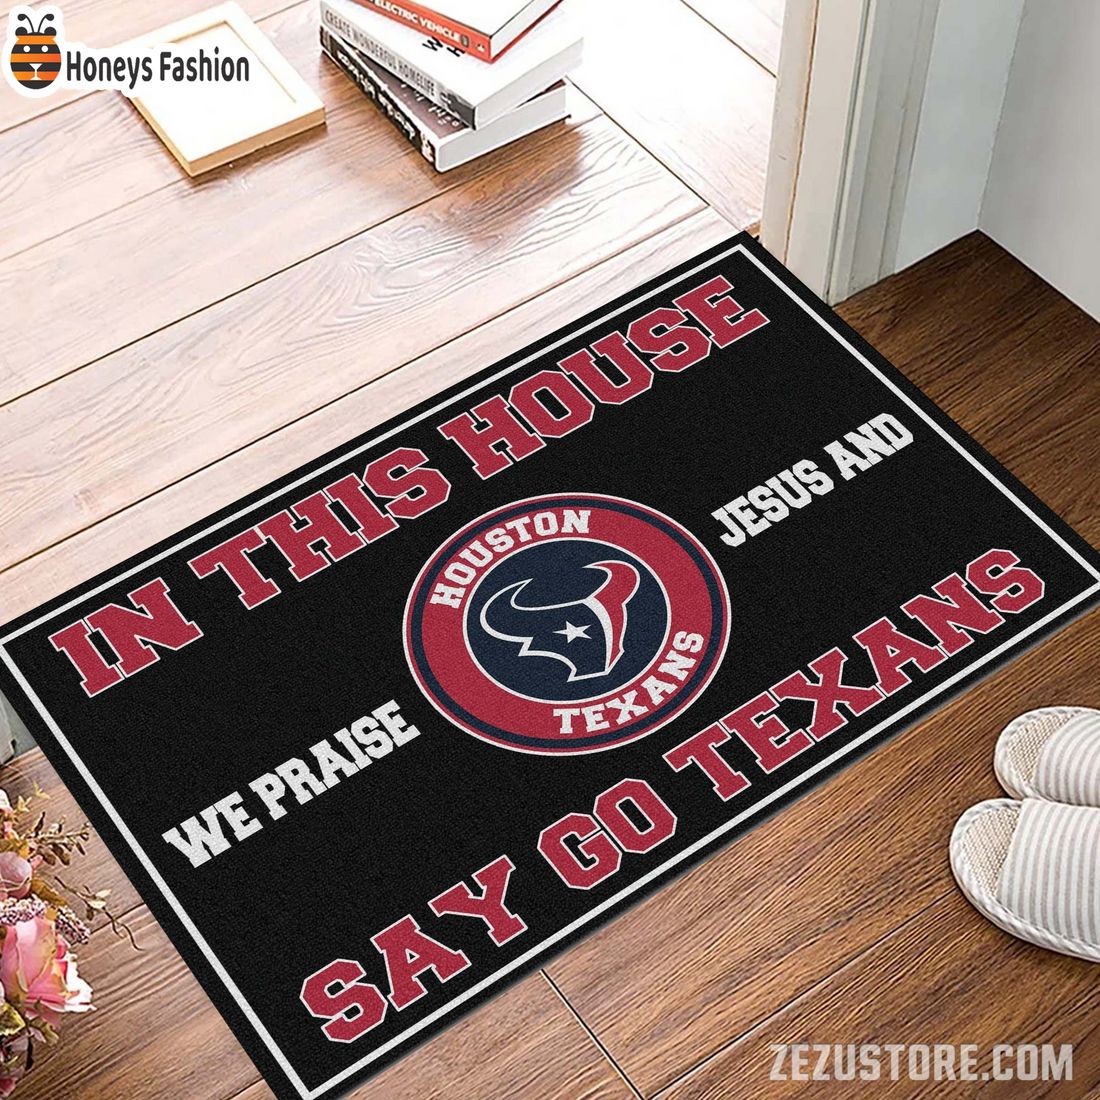 In this house we praise jesus and say go Texans doormat